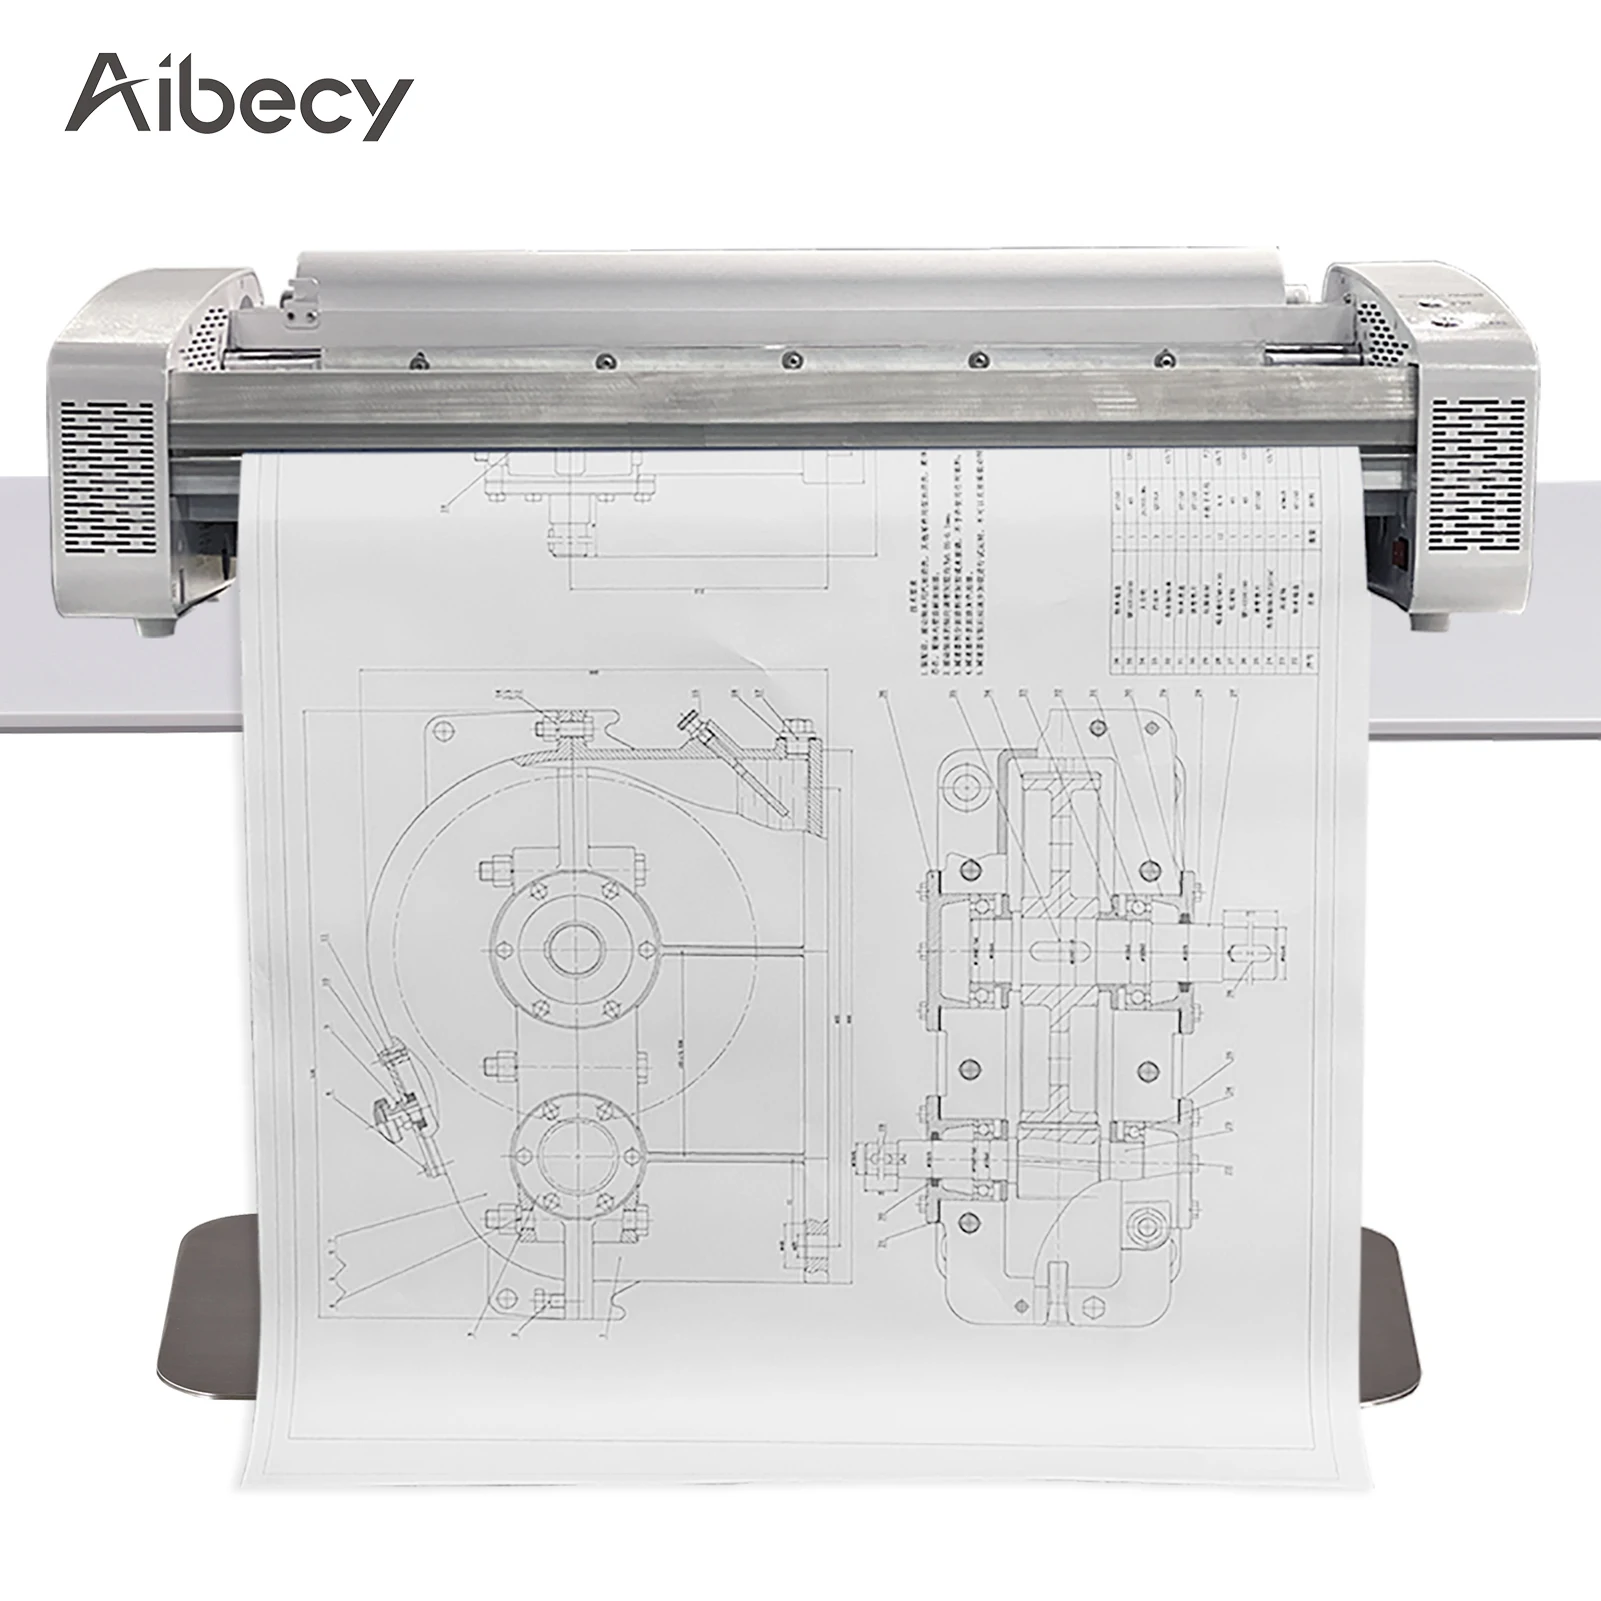 

Aibecy G6 Large Format Plotter Printer 36 Inch Engineering CAD Drawings Printer Hot-Melt Technology High Speed Printing No Ink